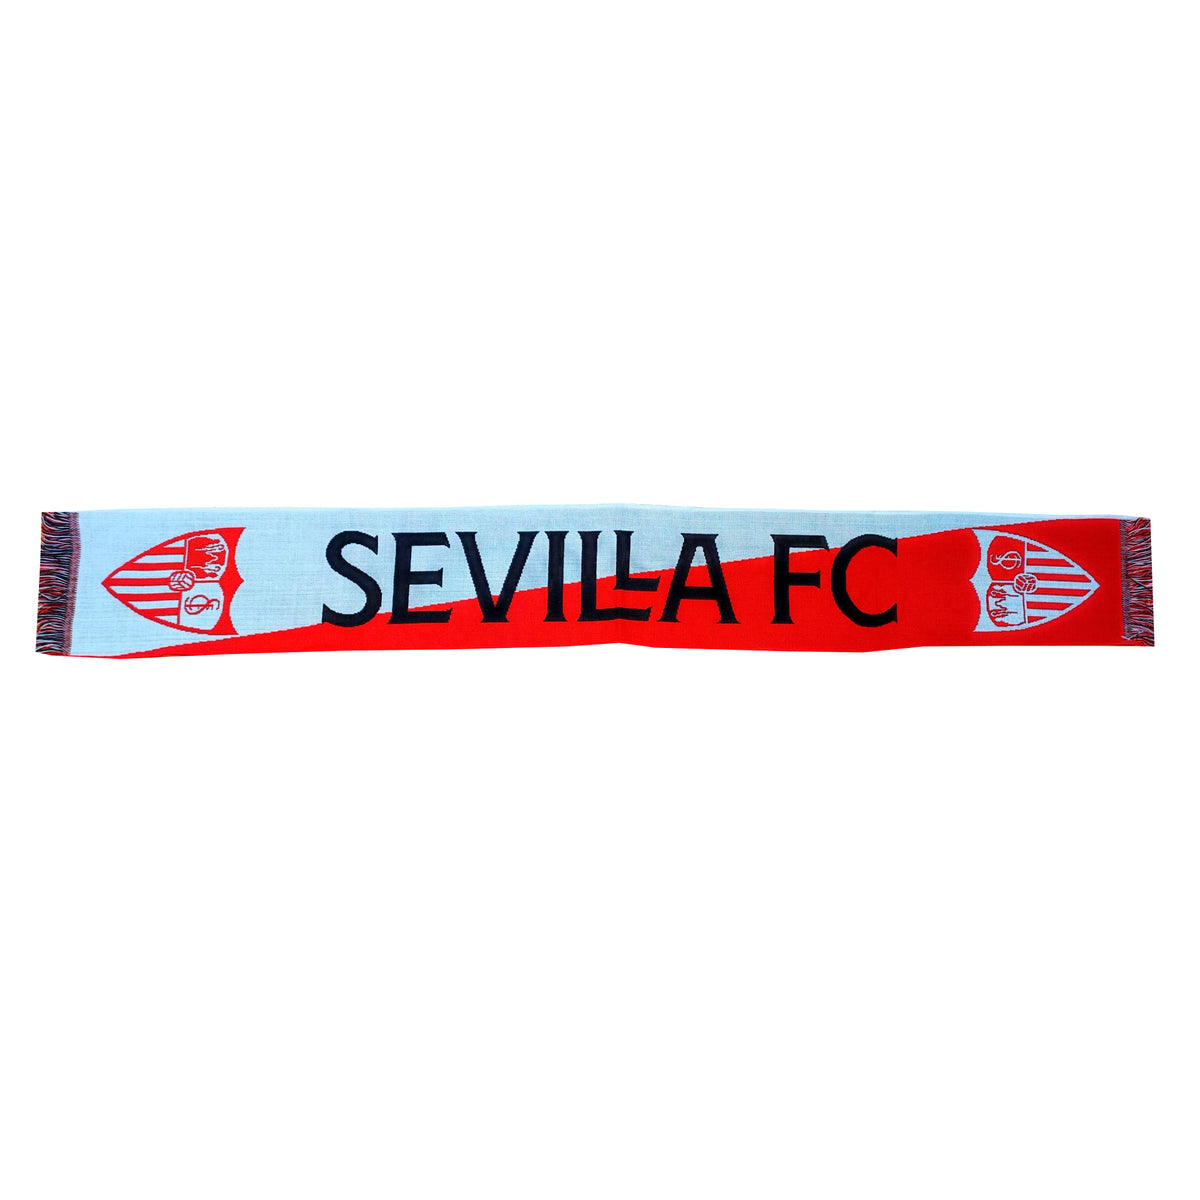 White and red Sevilla FC scarf